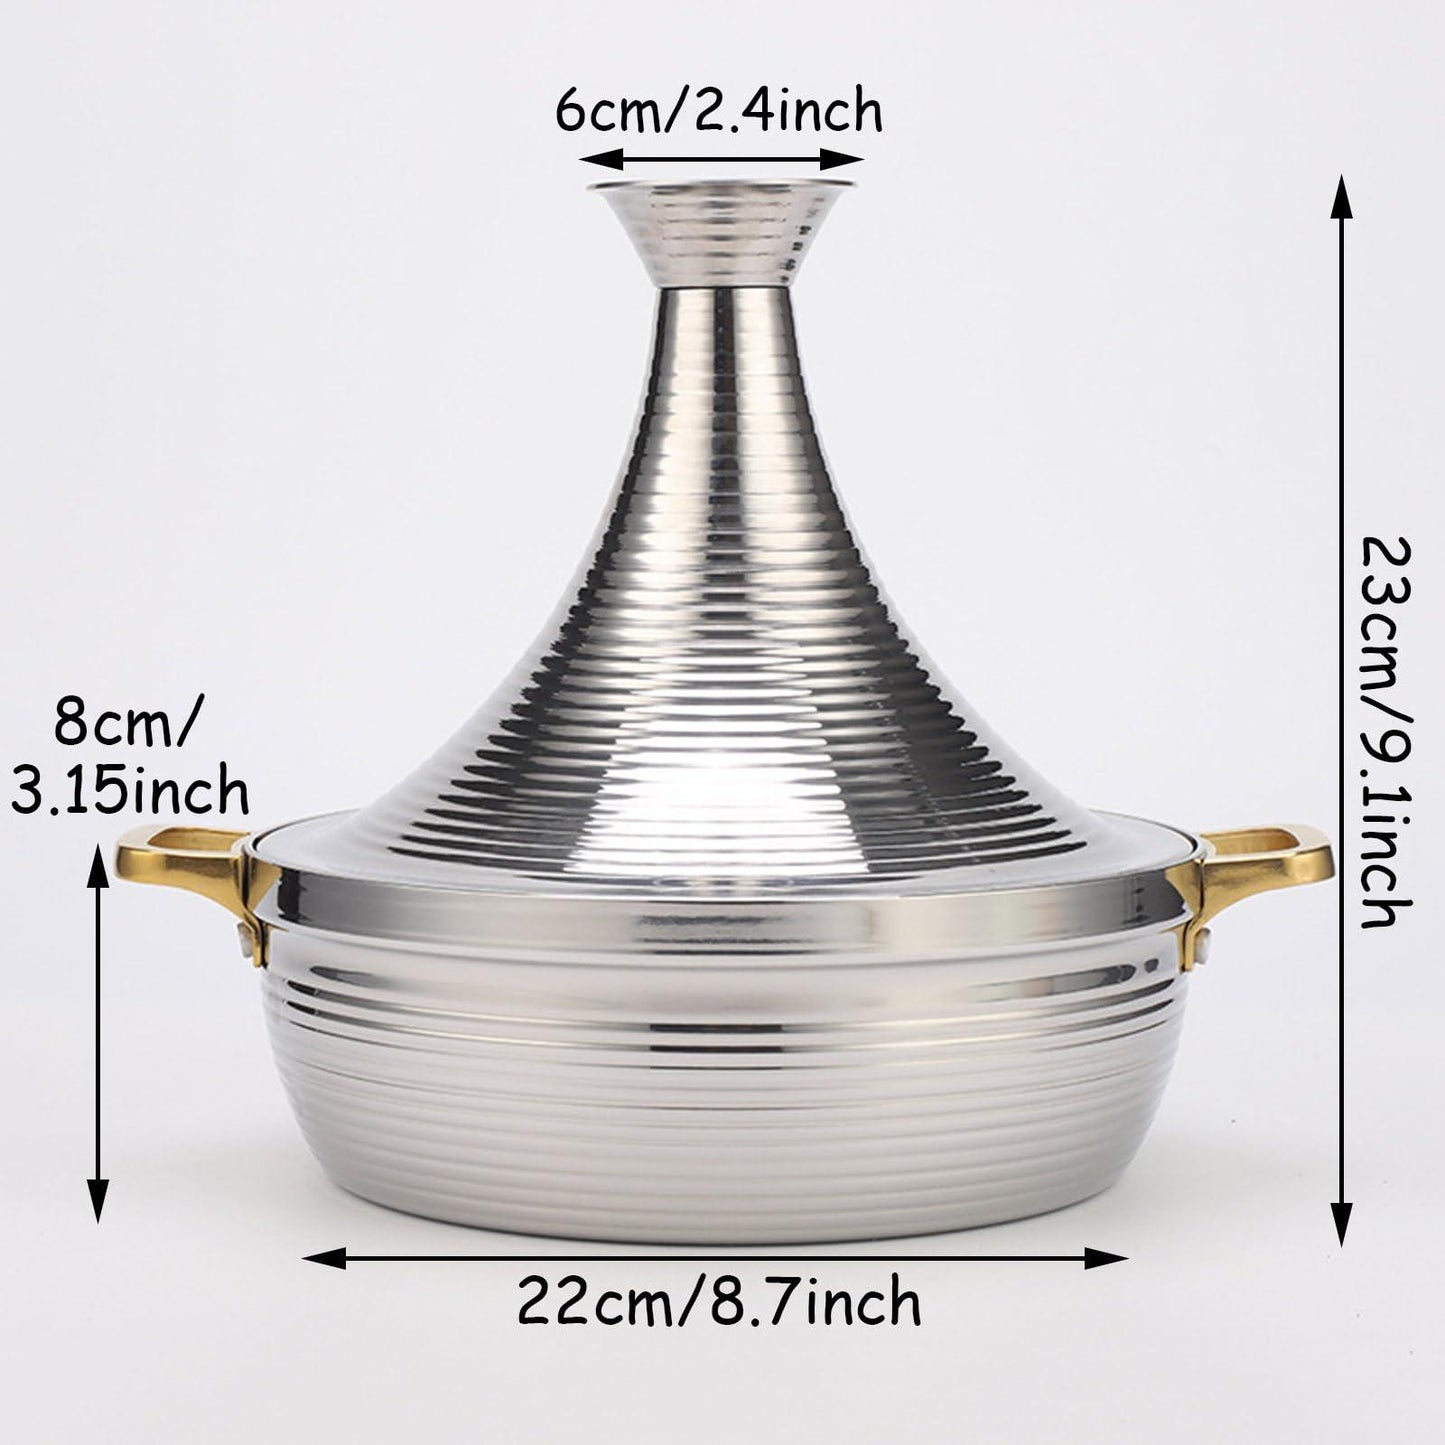 304 Stainless Steel Moroccan Tagine Pot, Non Stick Moroccan Cooking Pot with 2 Handles, Large Moroccan Cooker Handmade Tagine Pot with Cone-Shaped Lid,Silver,22cm - CookCave